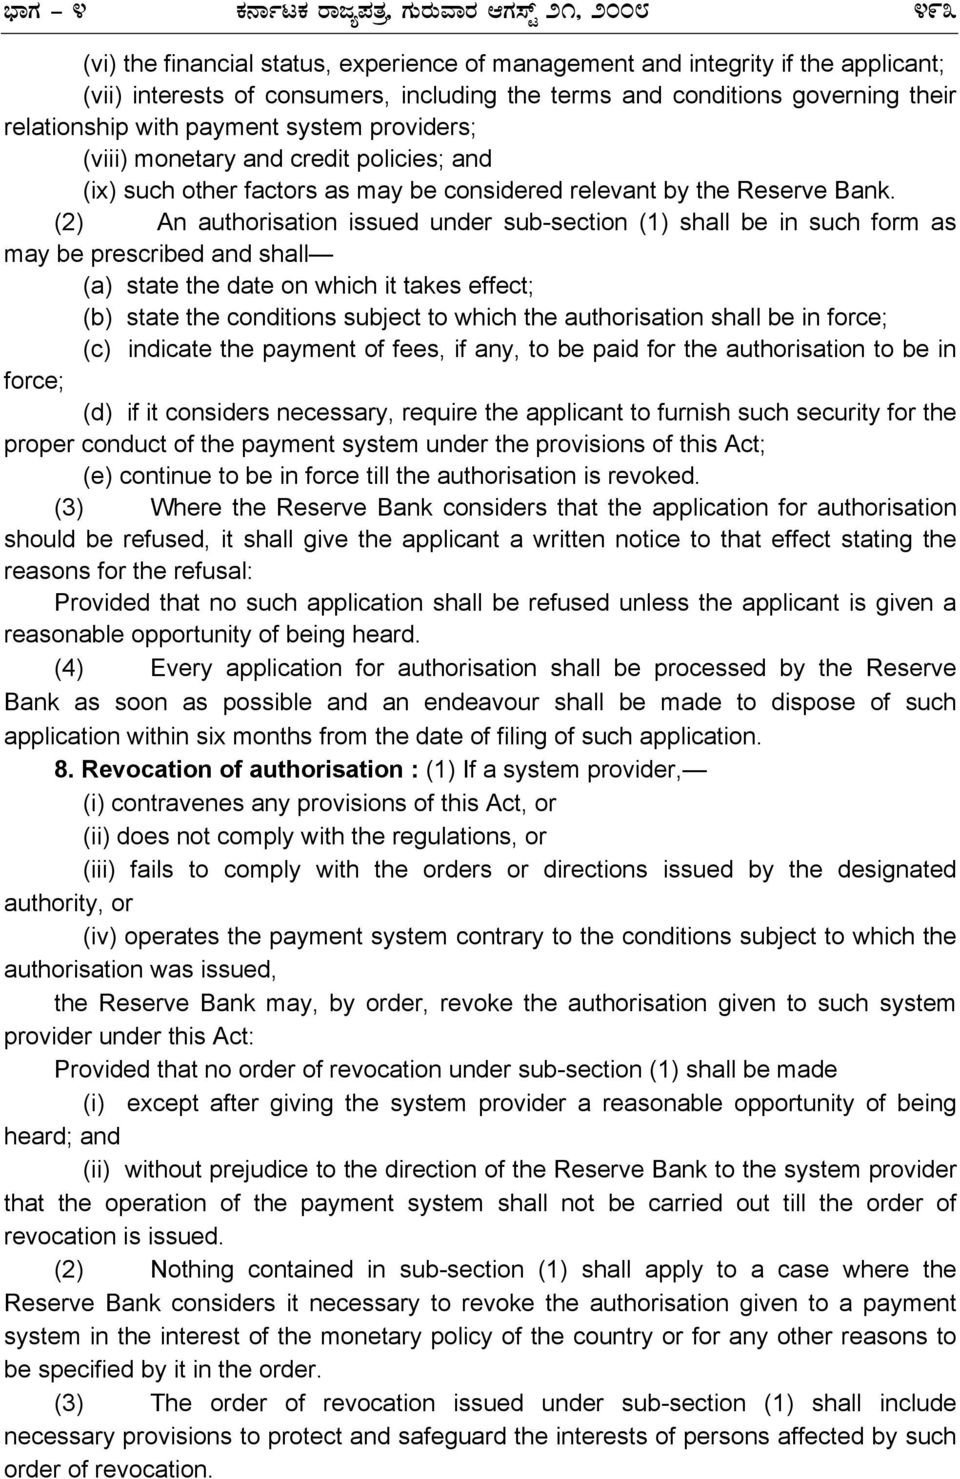 (2) An authorisation issued under sub-section (1) shall be in such form as may be prescribed and shall (a) state the date on which it takes effect; (b) state the conditions subject to which the